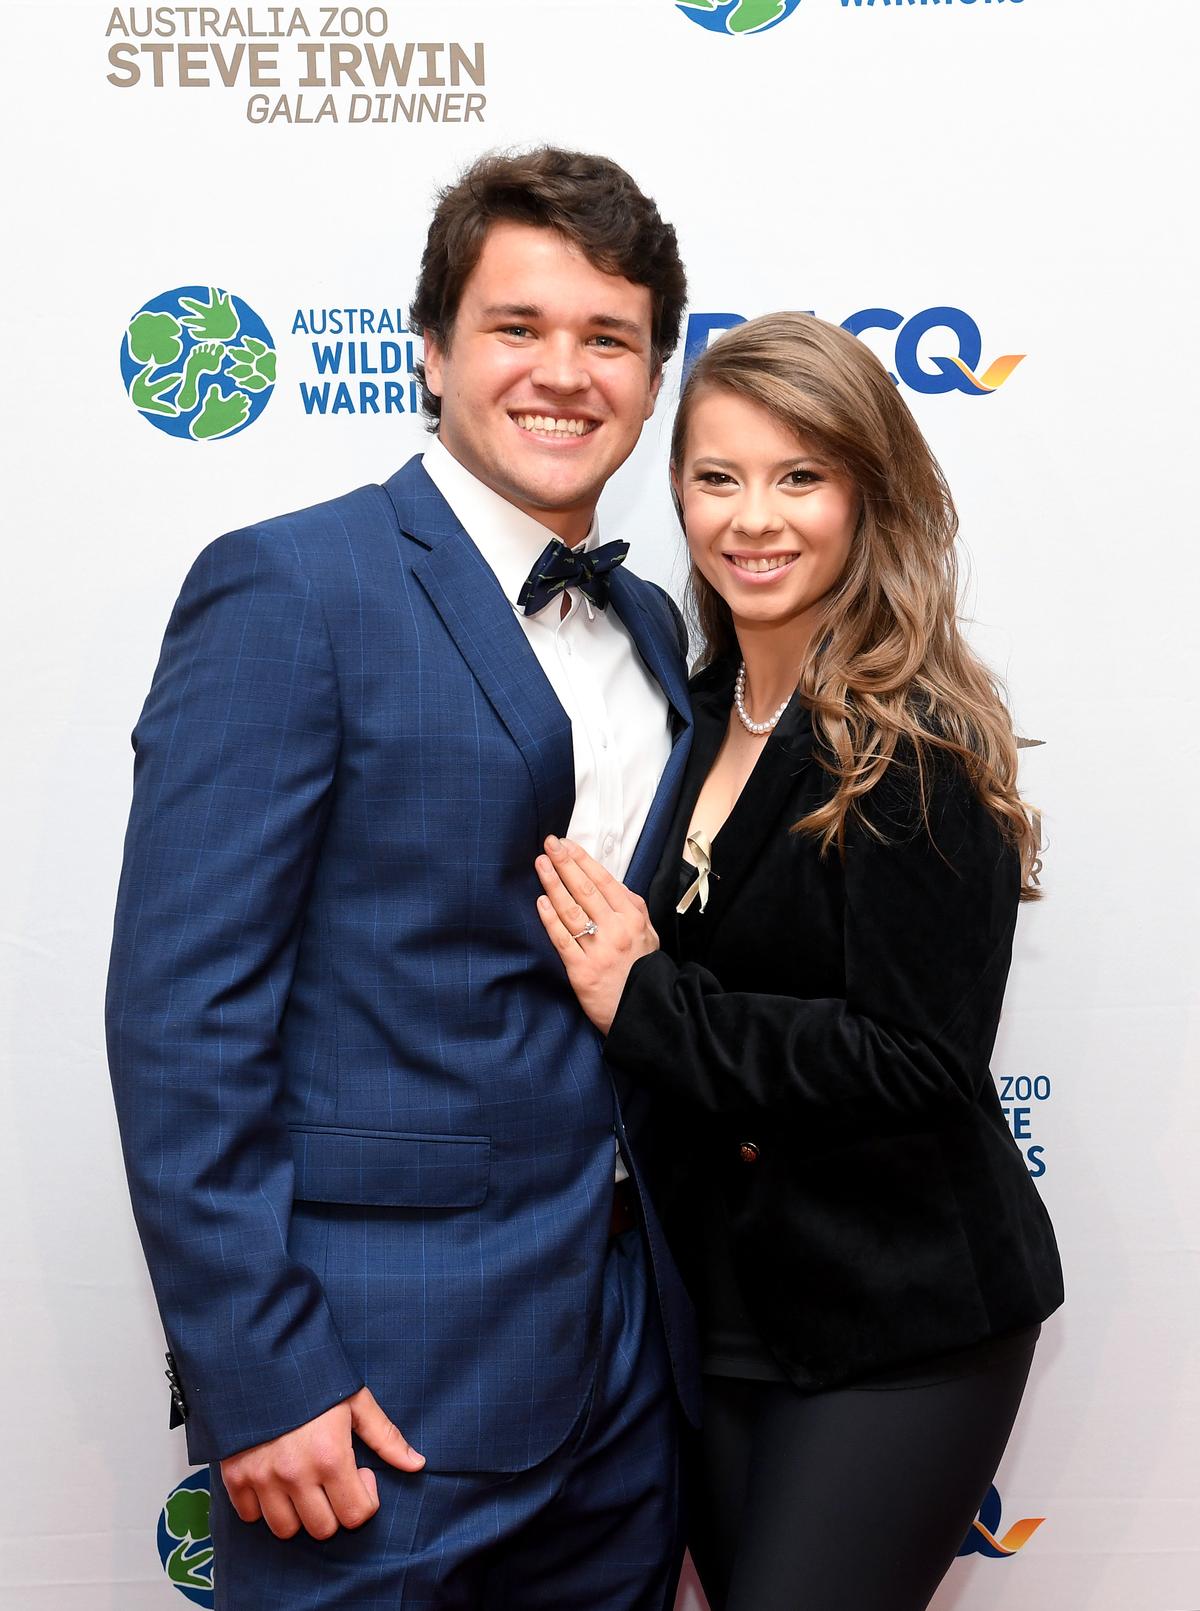 Bindi Irwin poses for a photo with fiance Chandler Powell at the annual Steve Irwin Gala Dinner at Brisbane Convention & Exhibition Centre on Nov. 9, 2019, in Brisbane, Australia. (Bradley Kanaris/Getty Images)